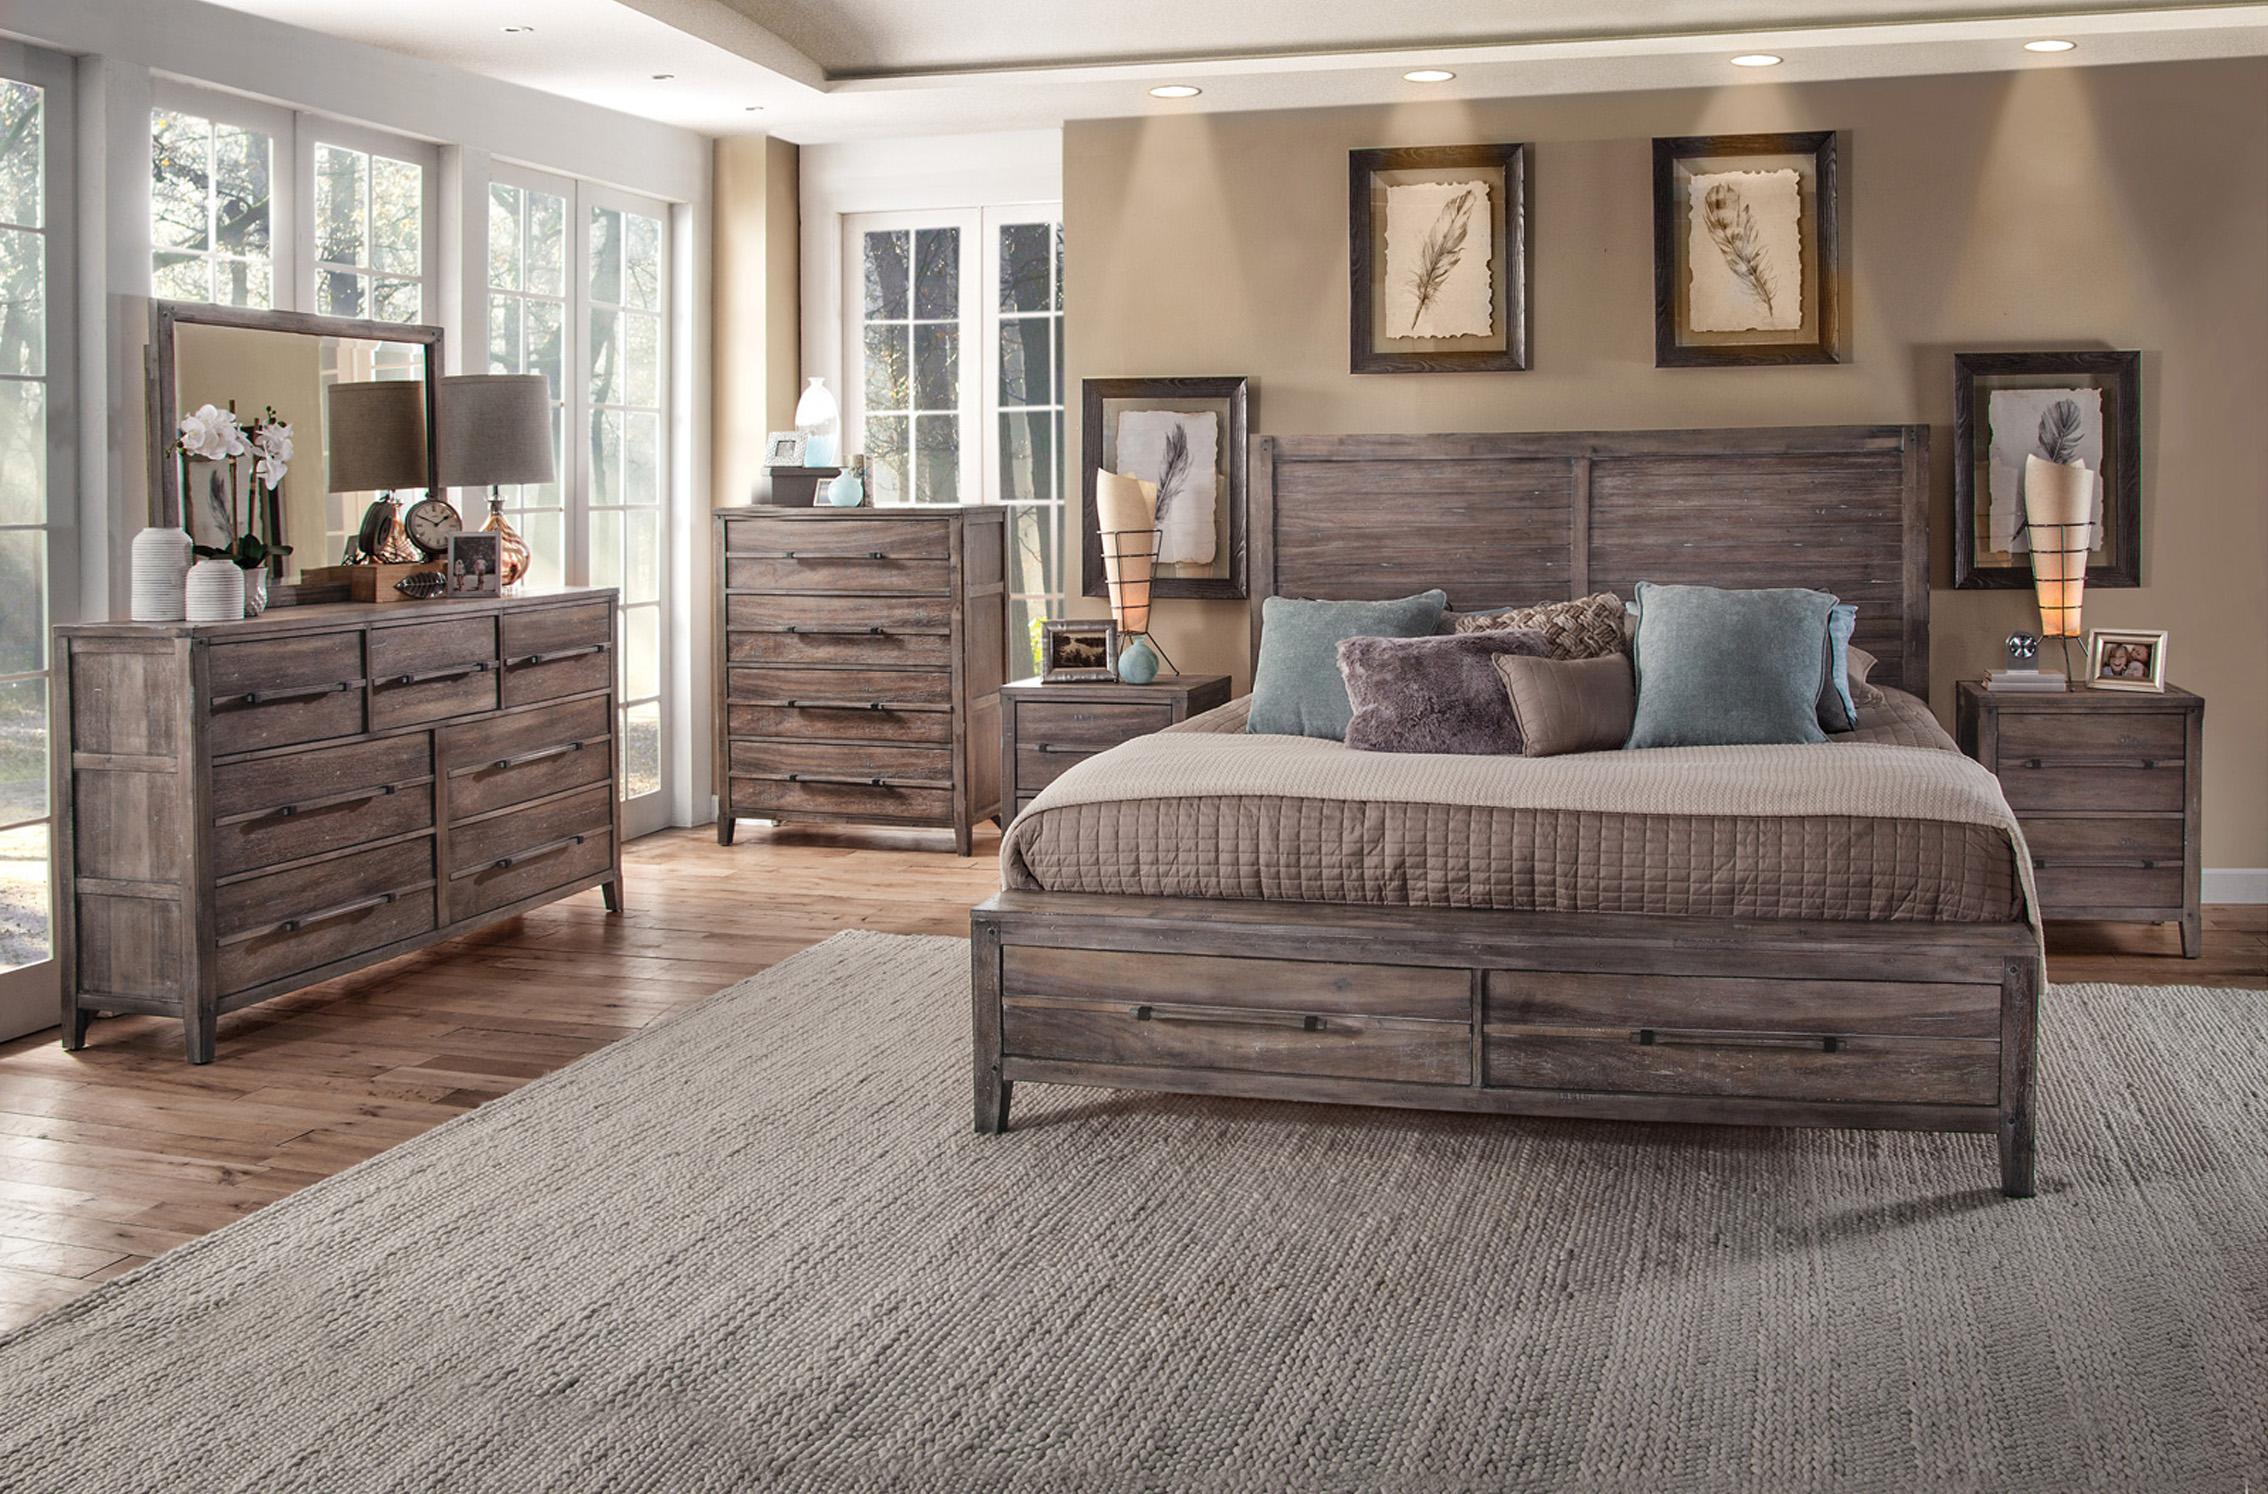 

    
American Woodcrafters AURORA 2800-66PNST Panel Bed Driftwood/Gray 2800-66PNST
